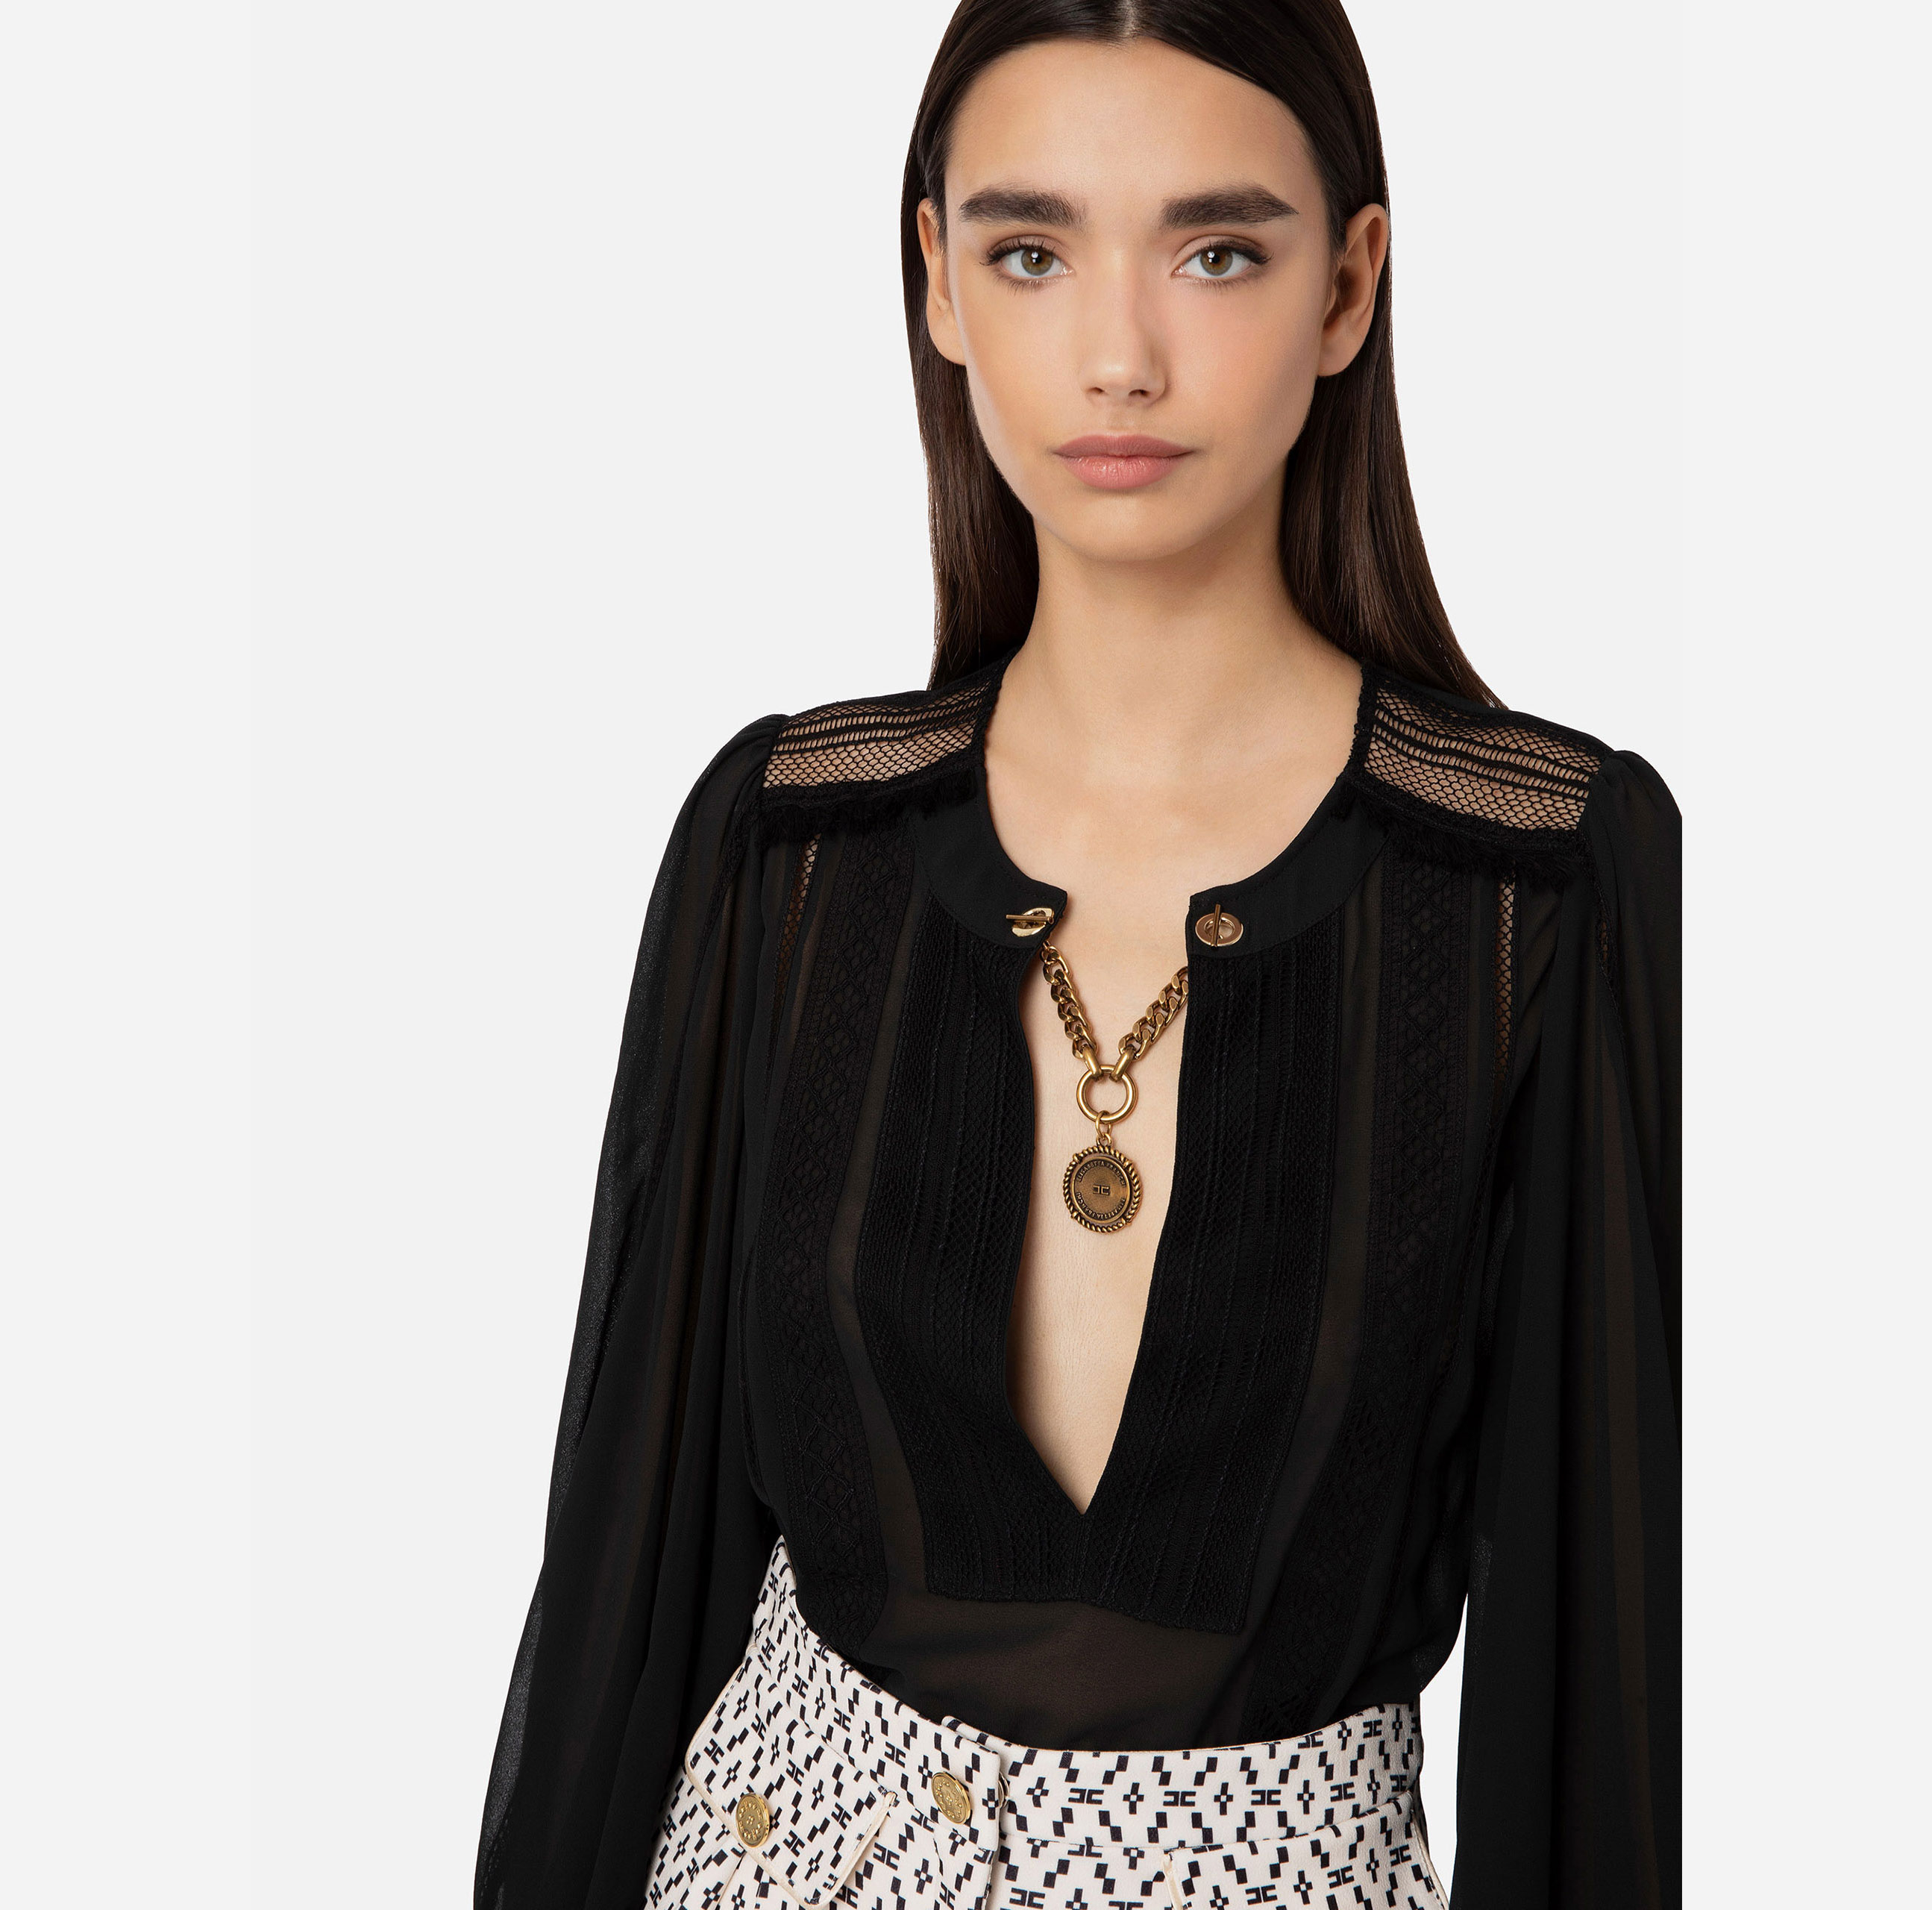 Blouse with ascot tie and lace inserts - Elisabetta Franchi